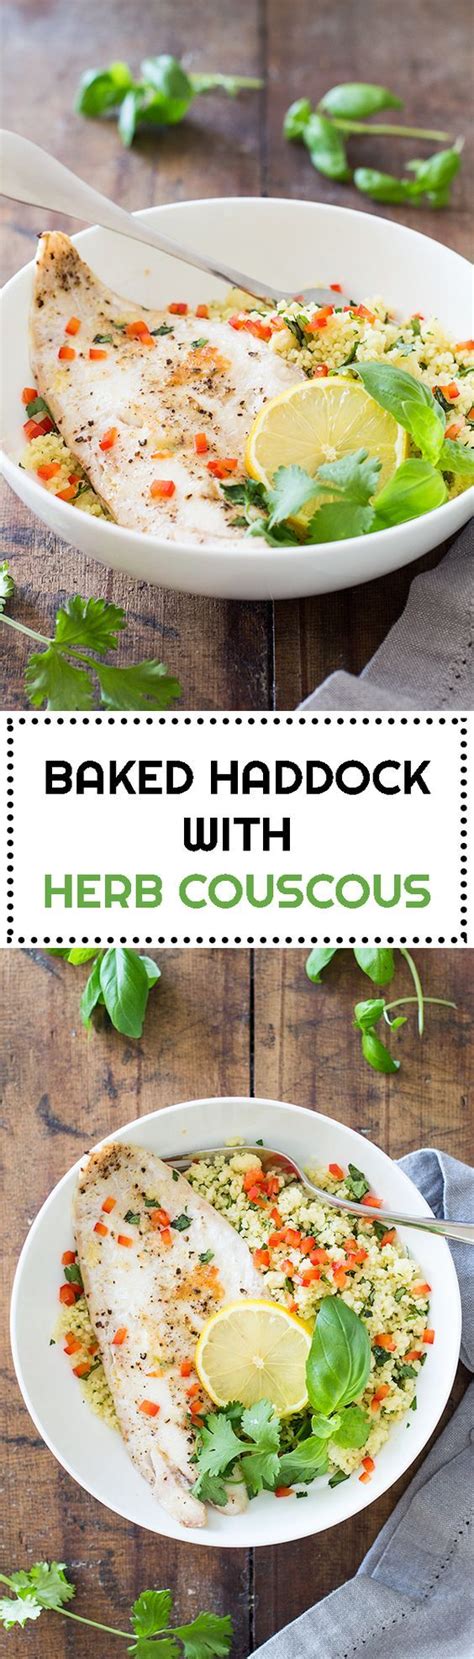 Grilled haddock (healthy easy recipe). Baked Haddock with Herb Couscous | Recipe | Couscous ...